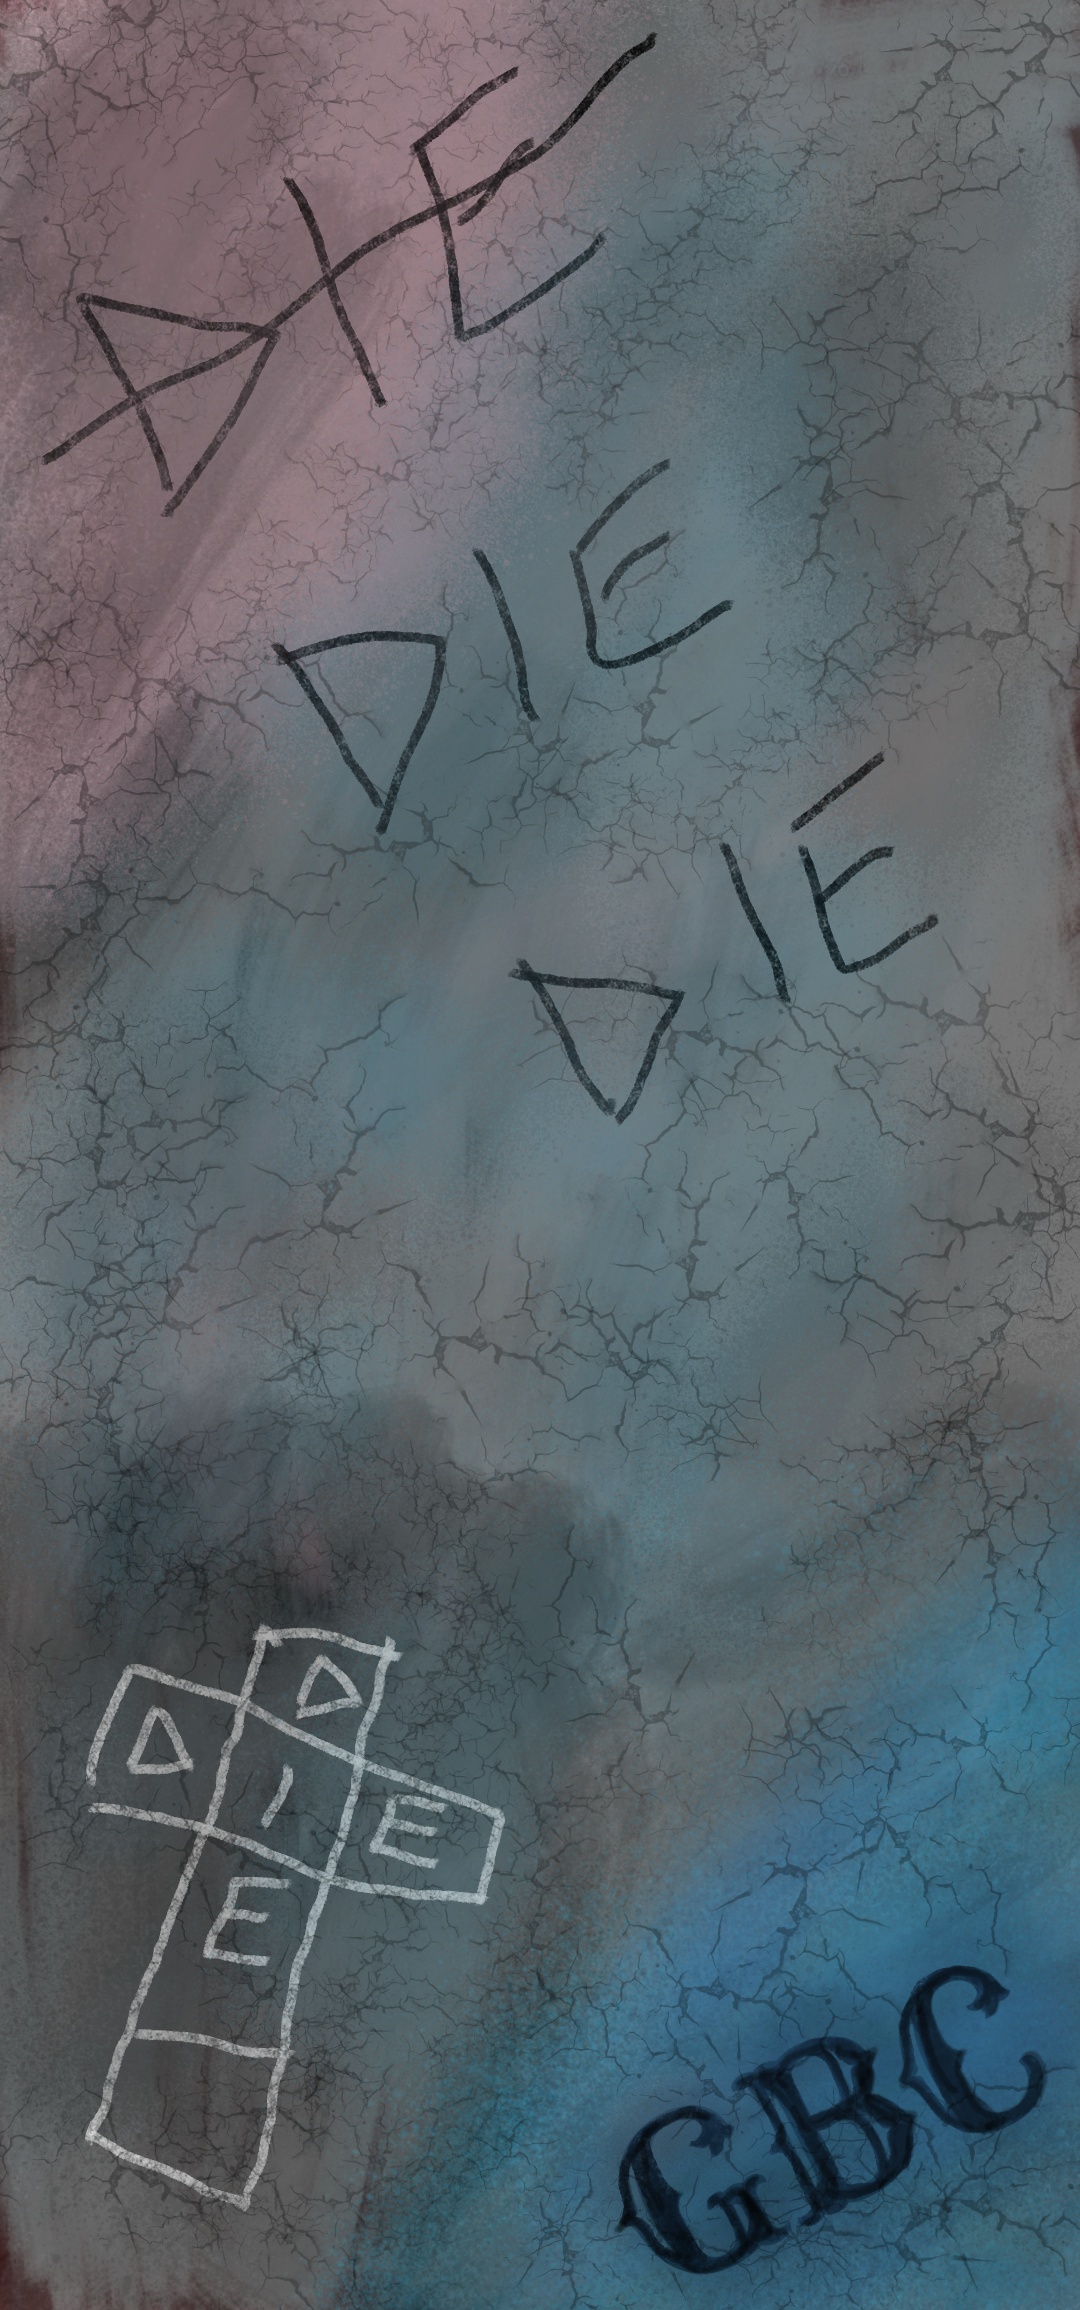 I made this mobile wallpaper based on the never say die jacket, I